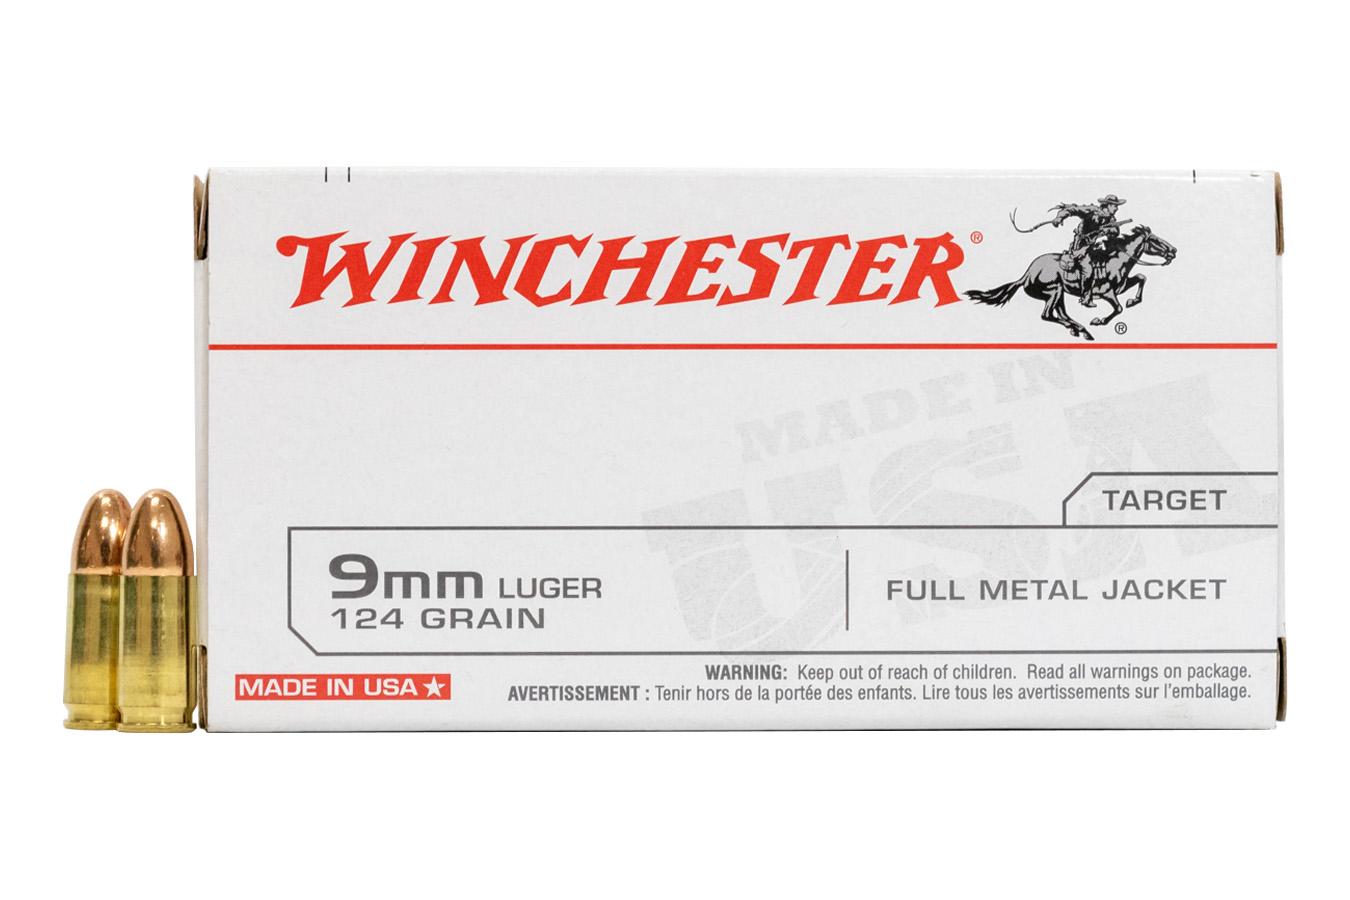 WINCHESTER AMMO 9MM 124 GR FMJ